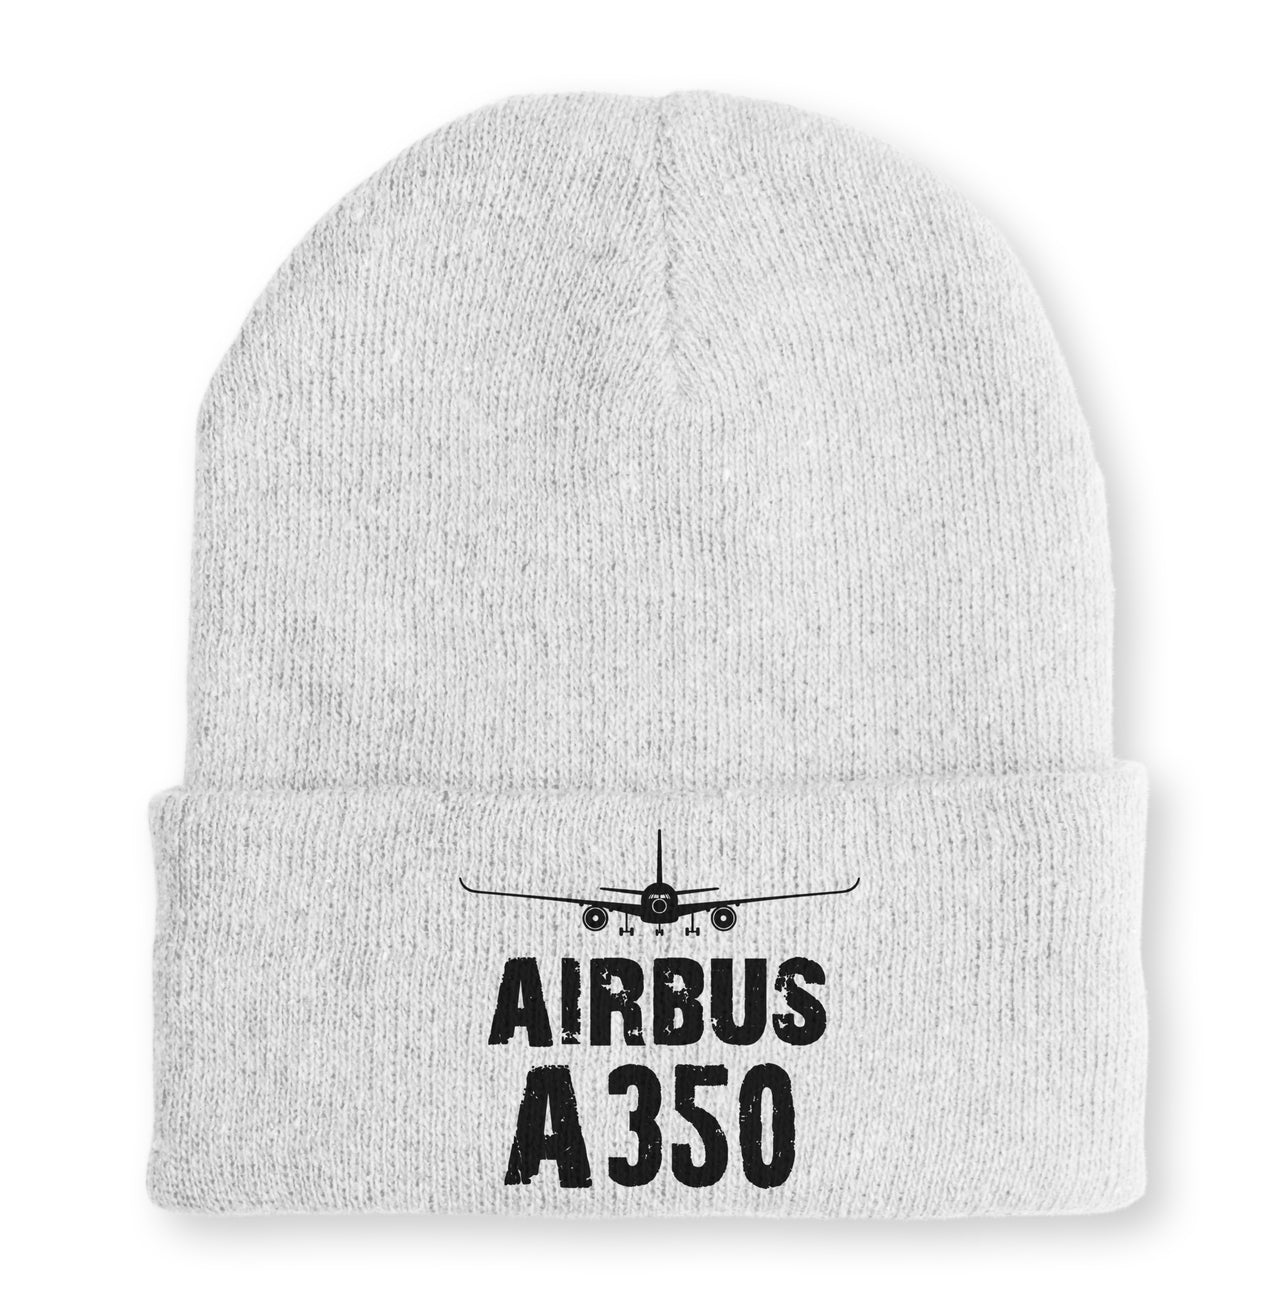 Airbus A350 & Plane Embroidered Beanies